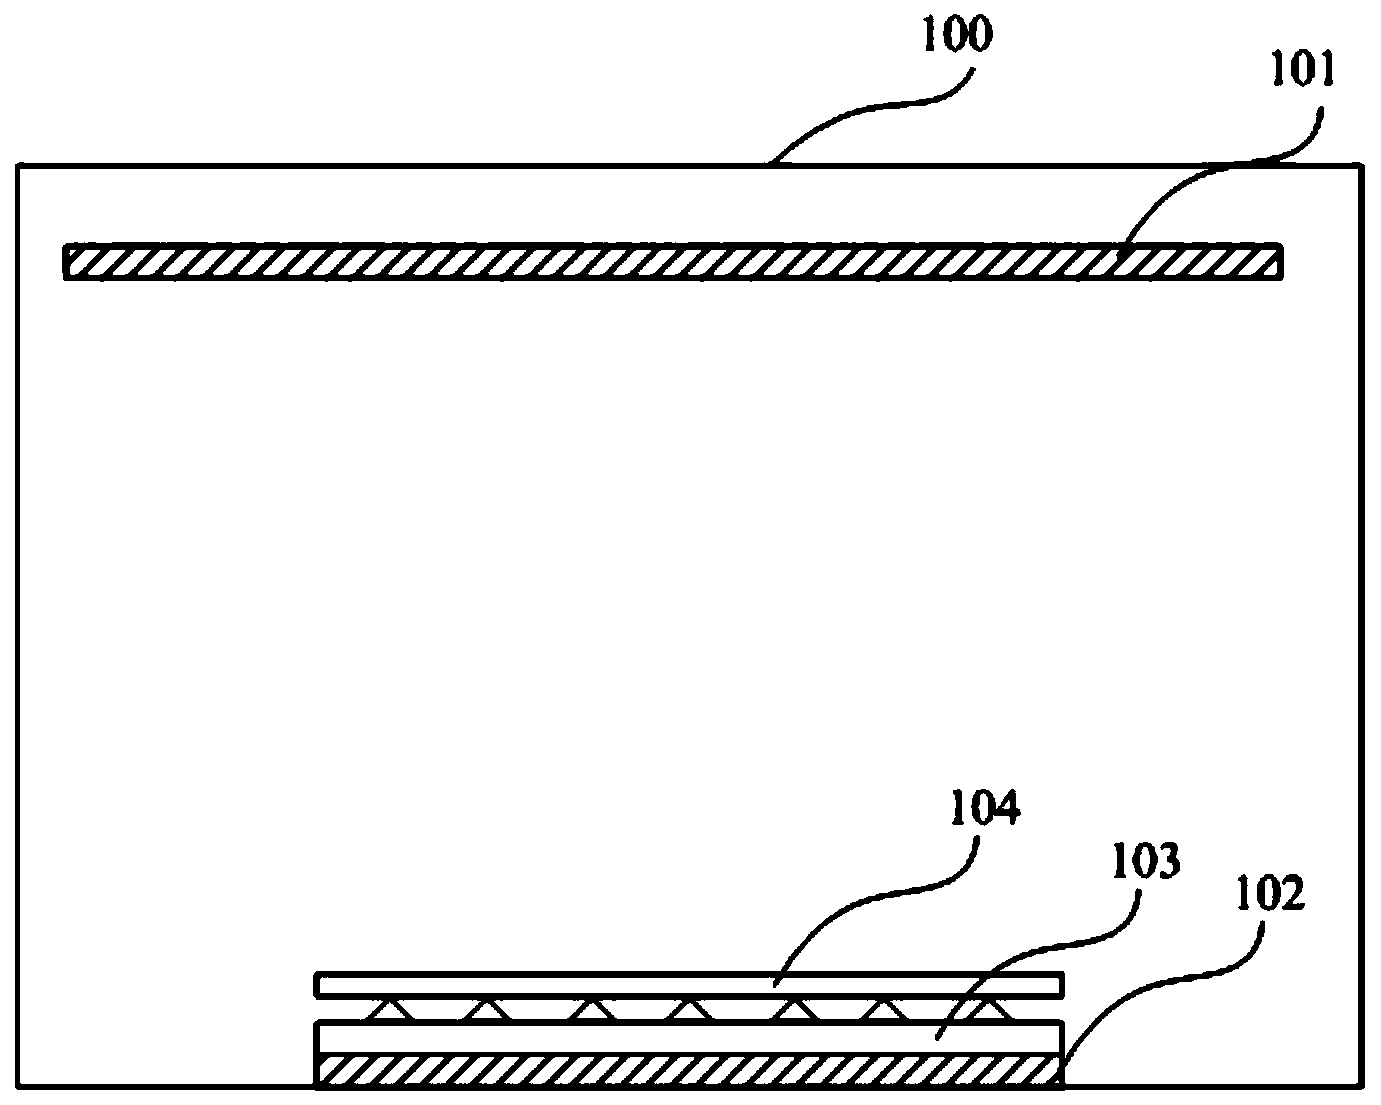 Lower electrode base platform of dry etching device and dry etching device